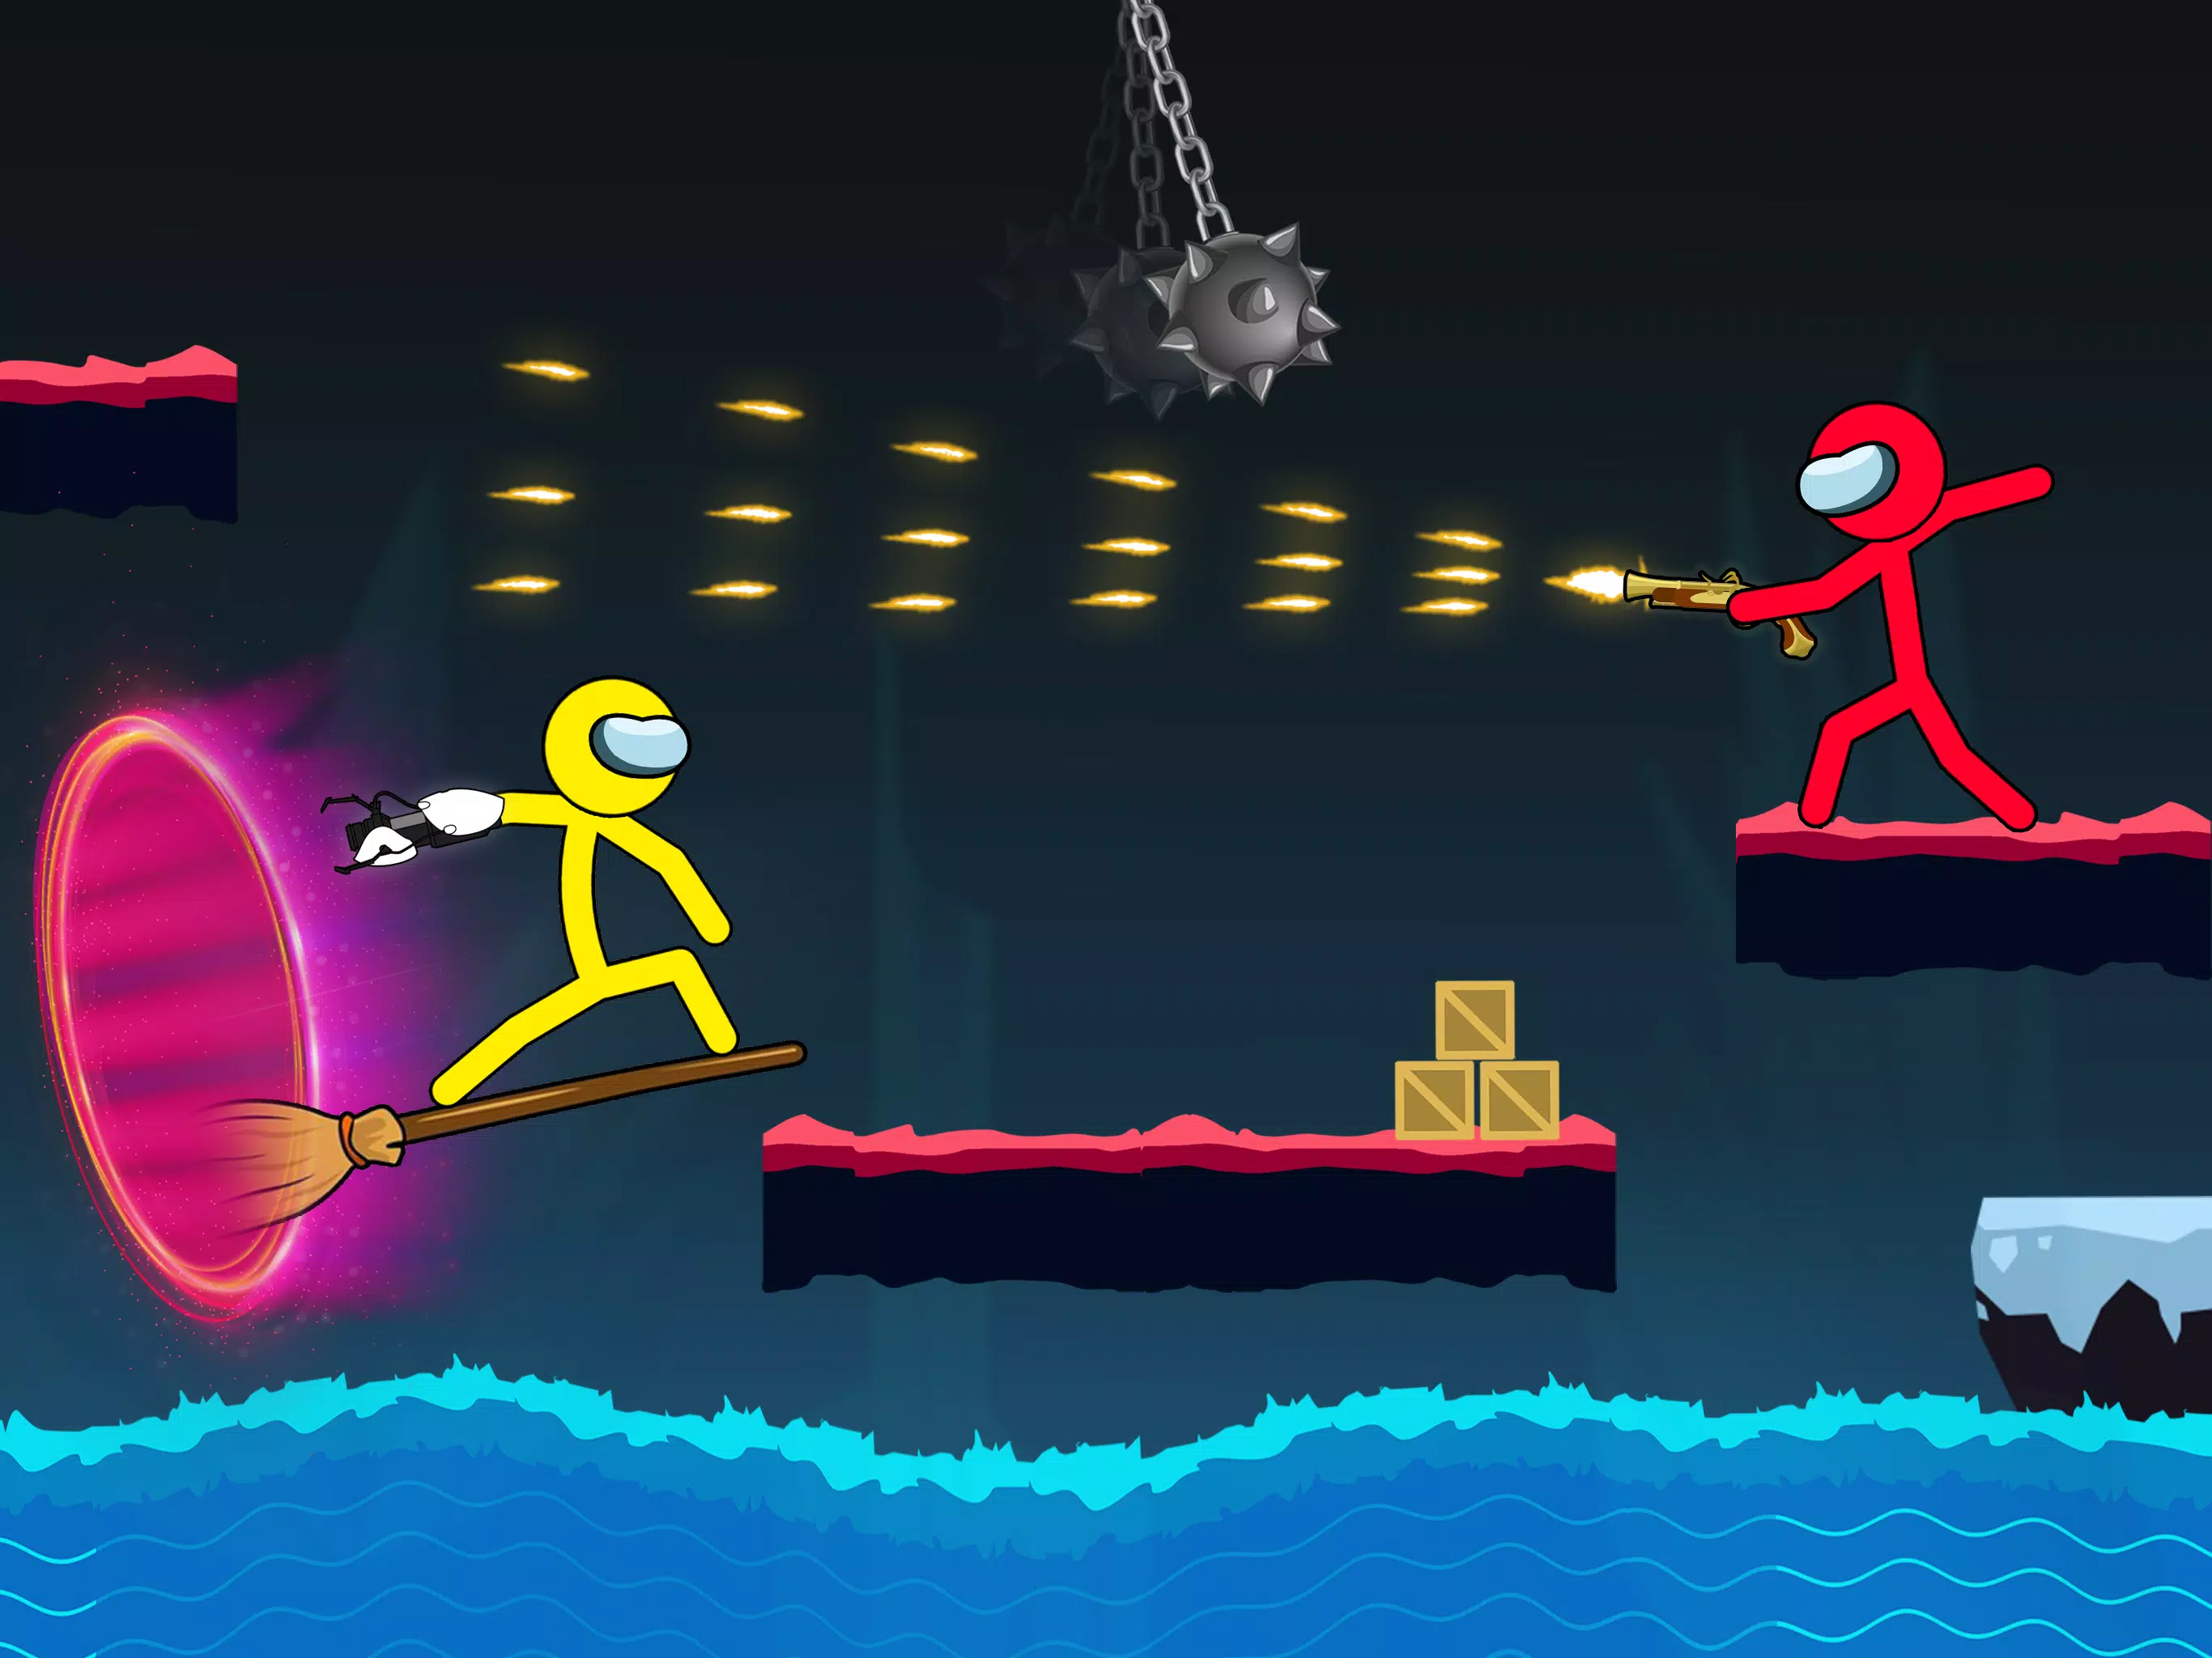 Free download Stickman Fighter: Karate Games APK for Android